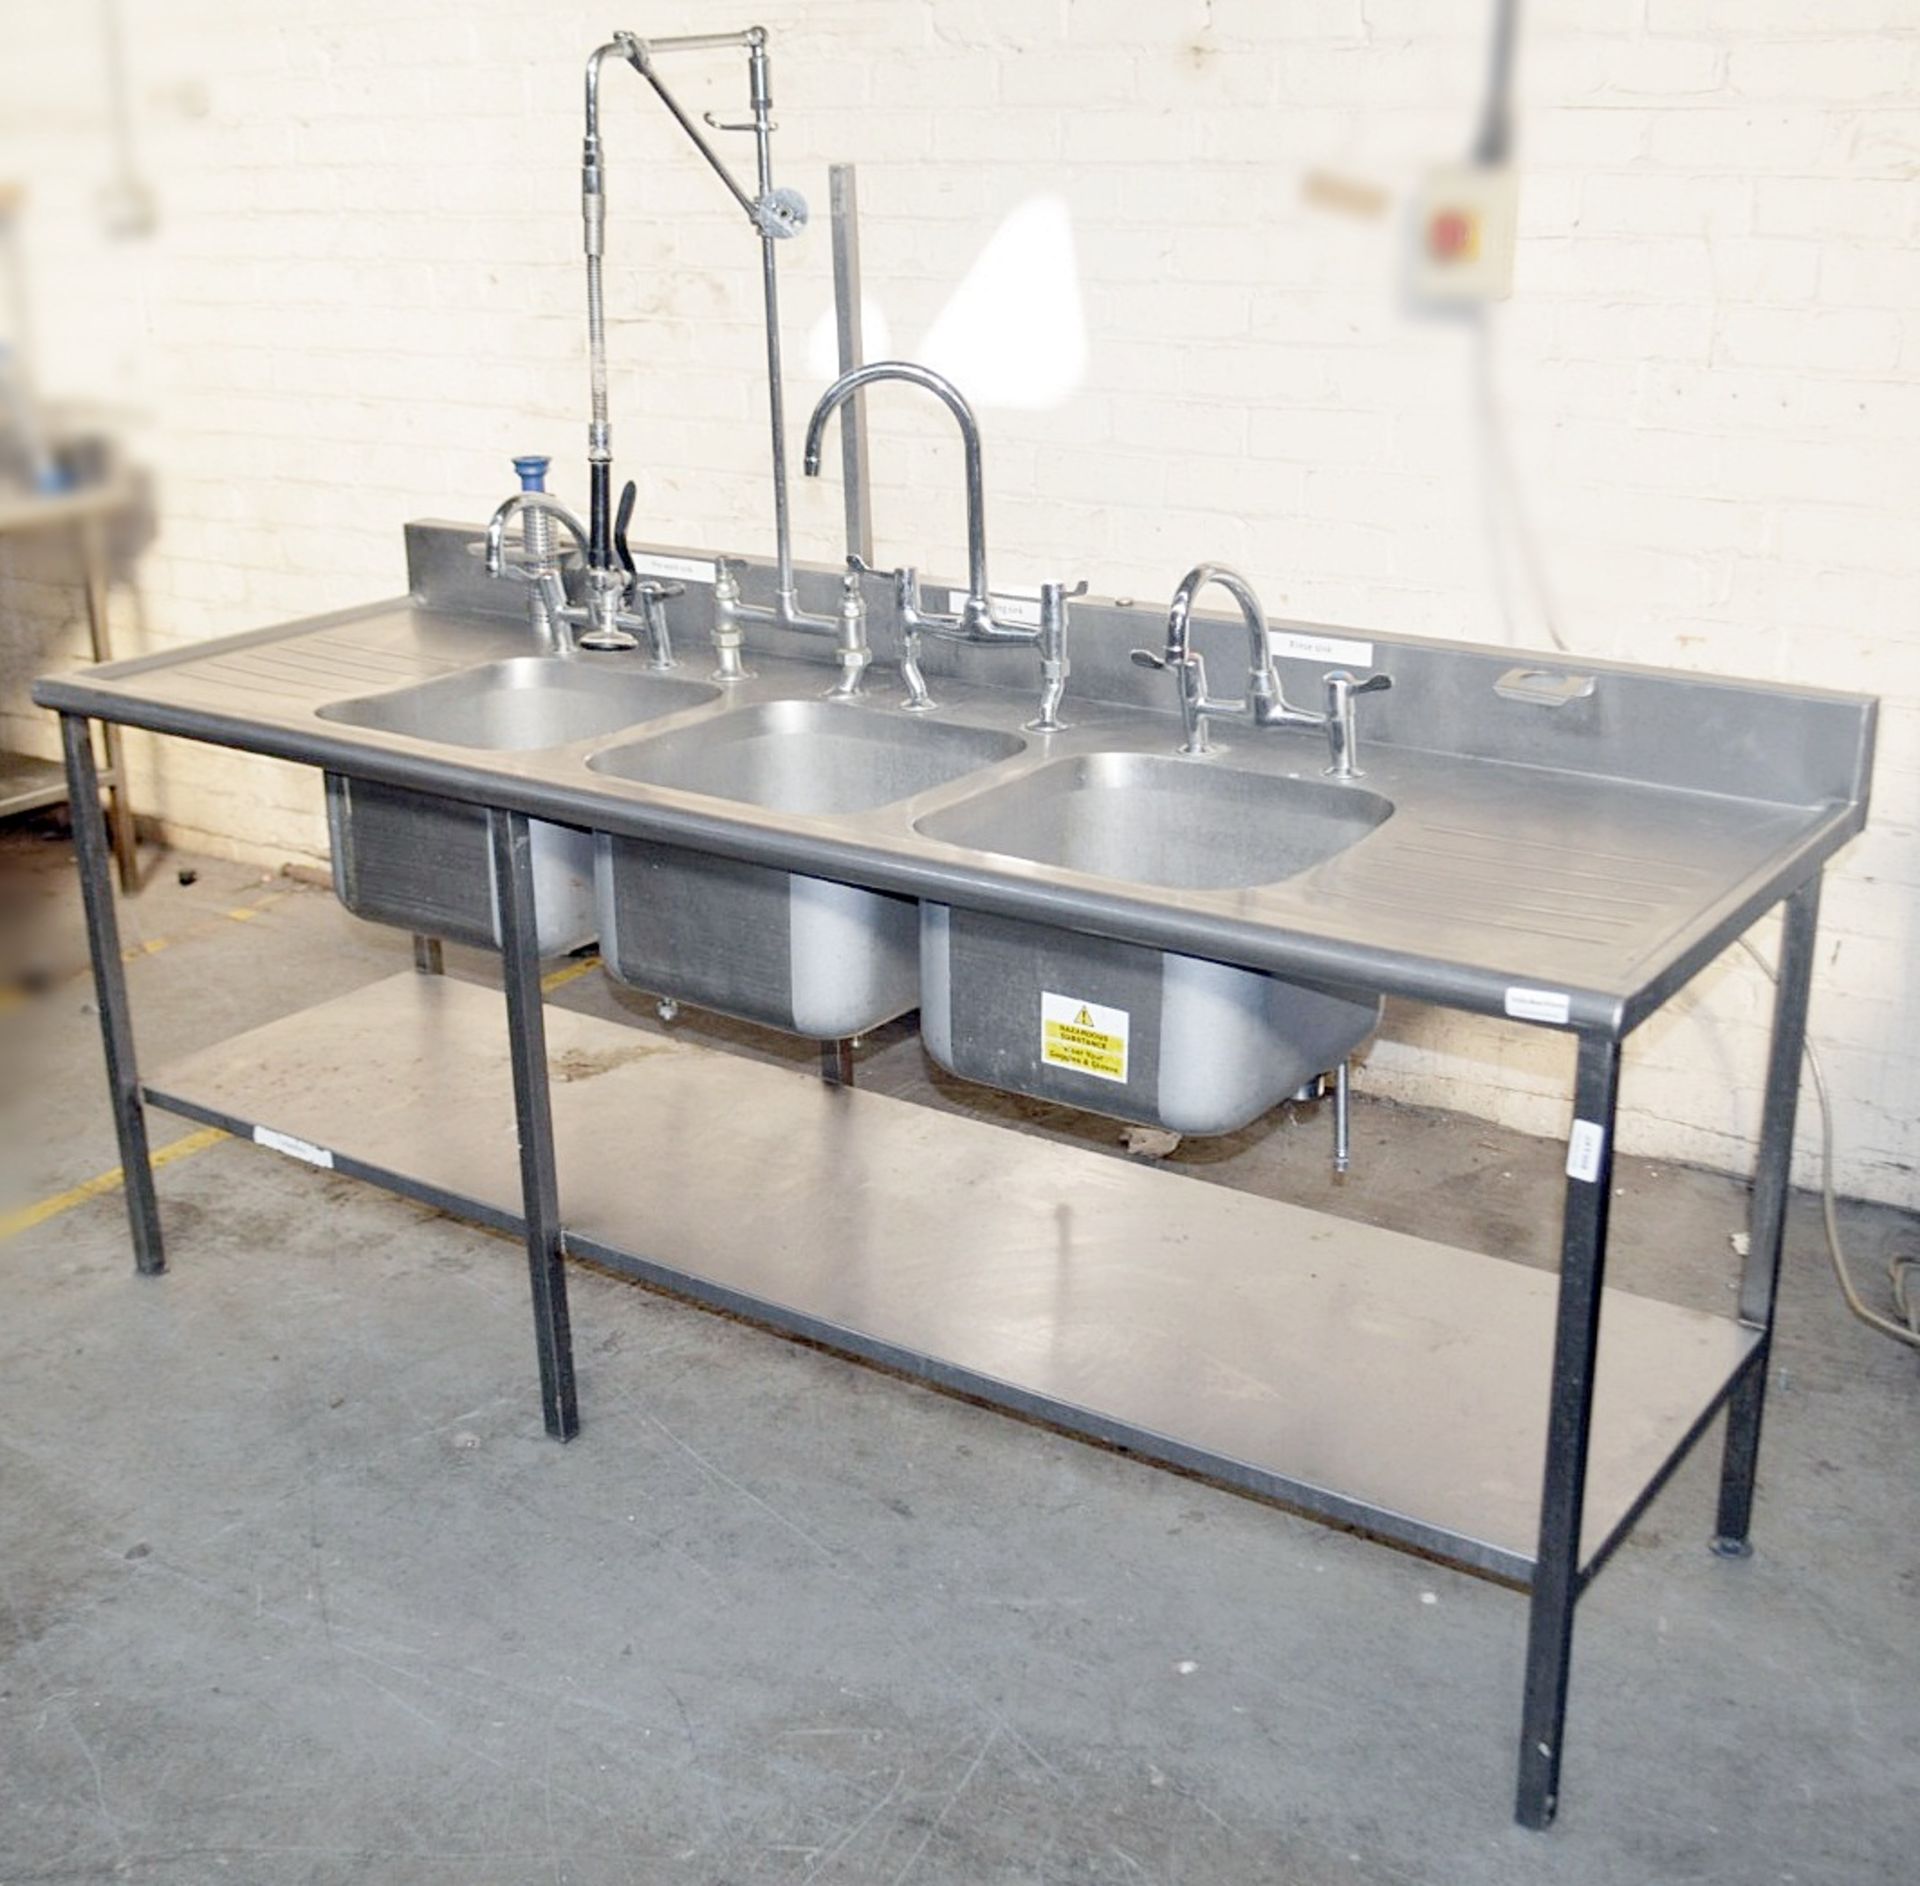 1 x Stainless Steel Commercial Kitchen Triple Pot Wash Sink Unit With Spray Arm - Dimensions: H97